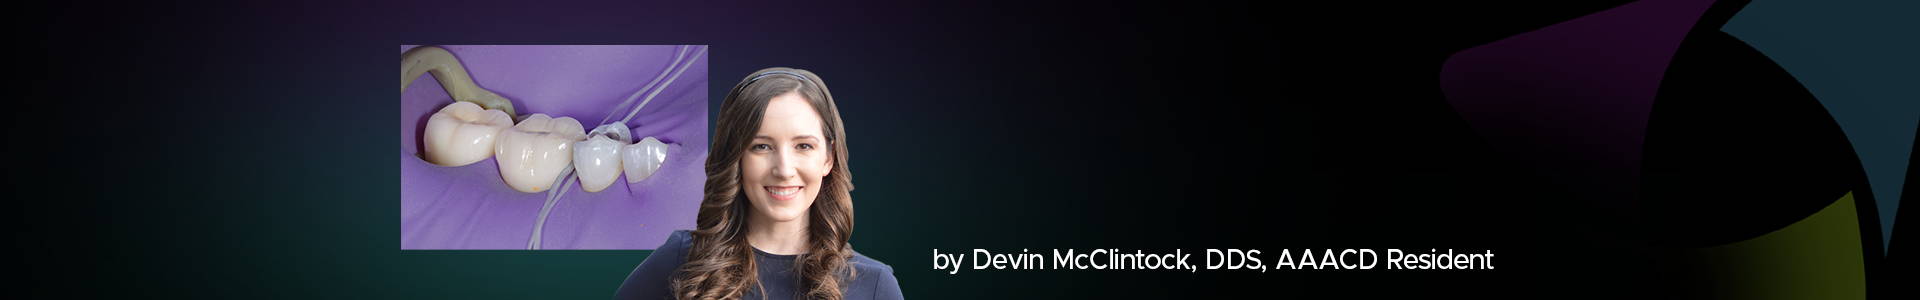 blog banner featuring Devin McClintock and a clinical image in the back